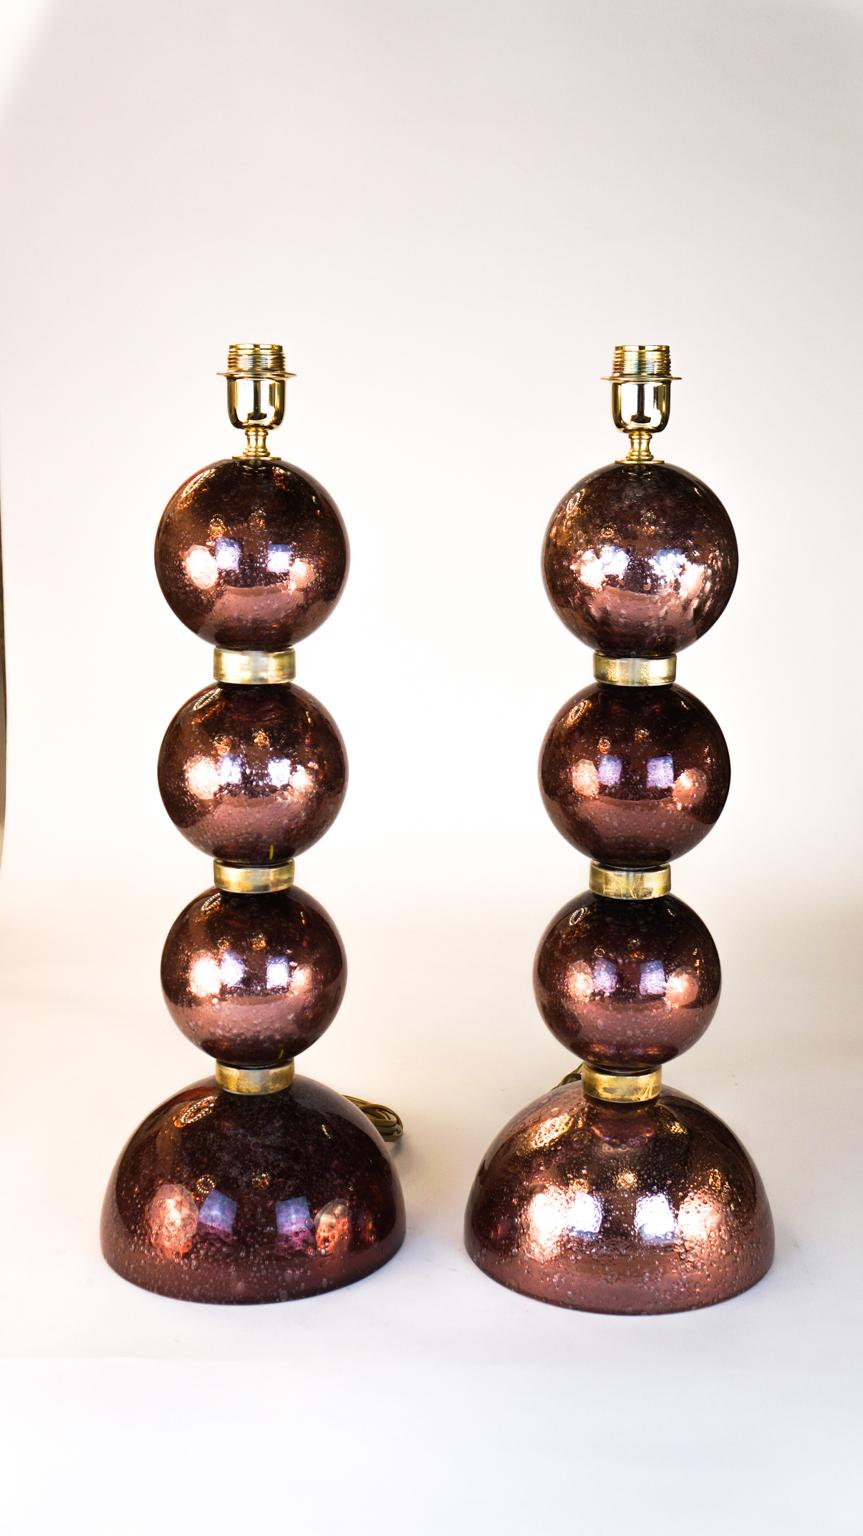 Hand-Crafted Alberto Donà Mid-Century Modern Italian Murano Glass Pair of Table Lamps, 1995s For Sale